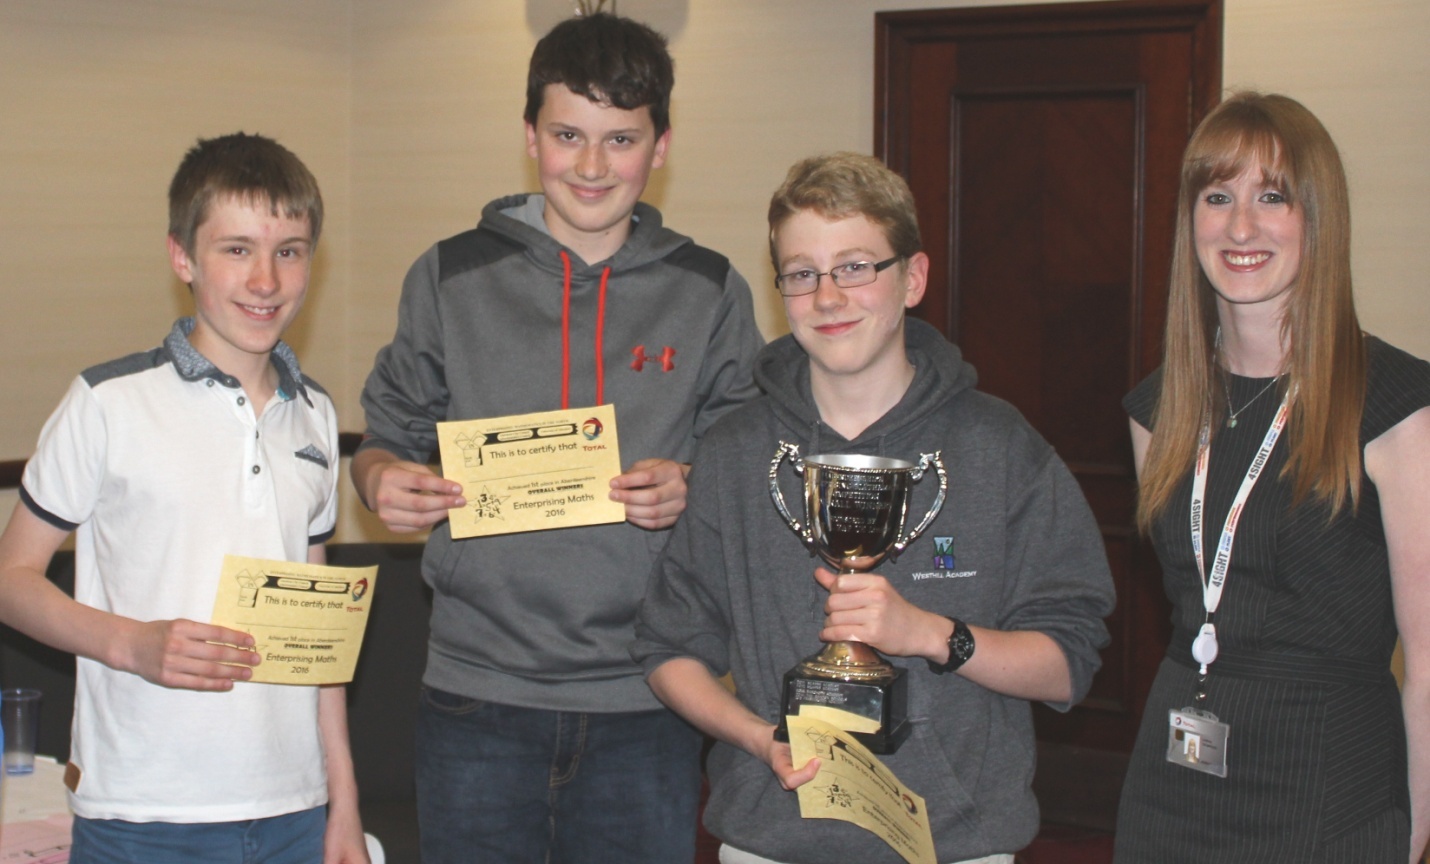 Westhill Academy winners (L-R) Ieuen Harries, Jacob Dohan and James Marriner with TEP UK Graduate Information Systems Analyst, Lindsey Thompson (far right).